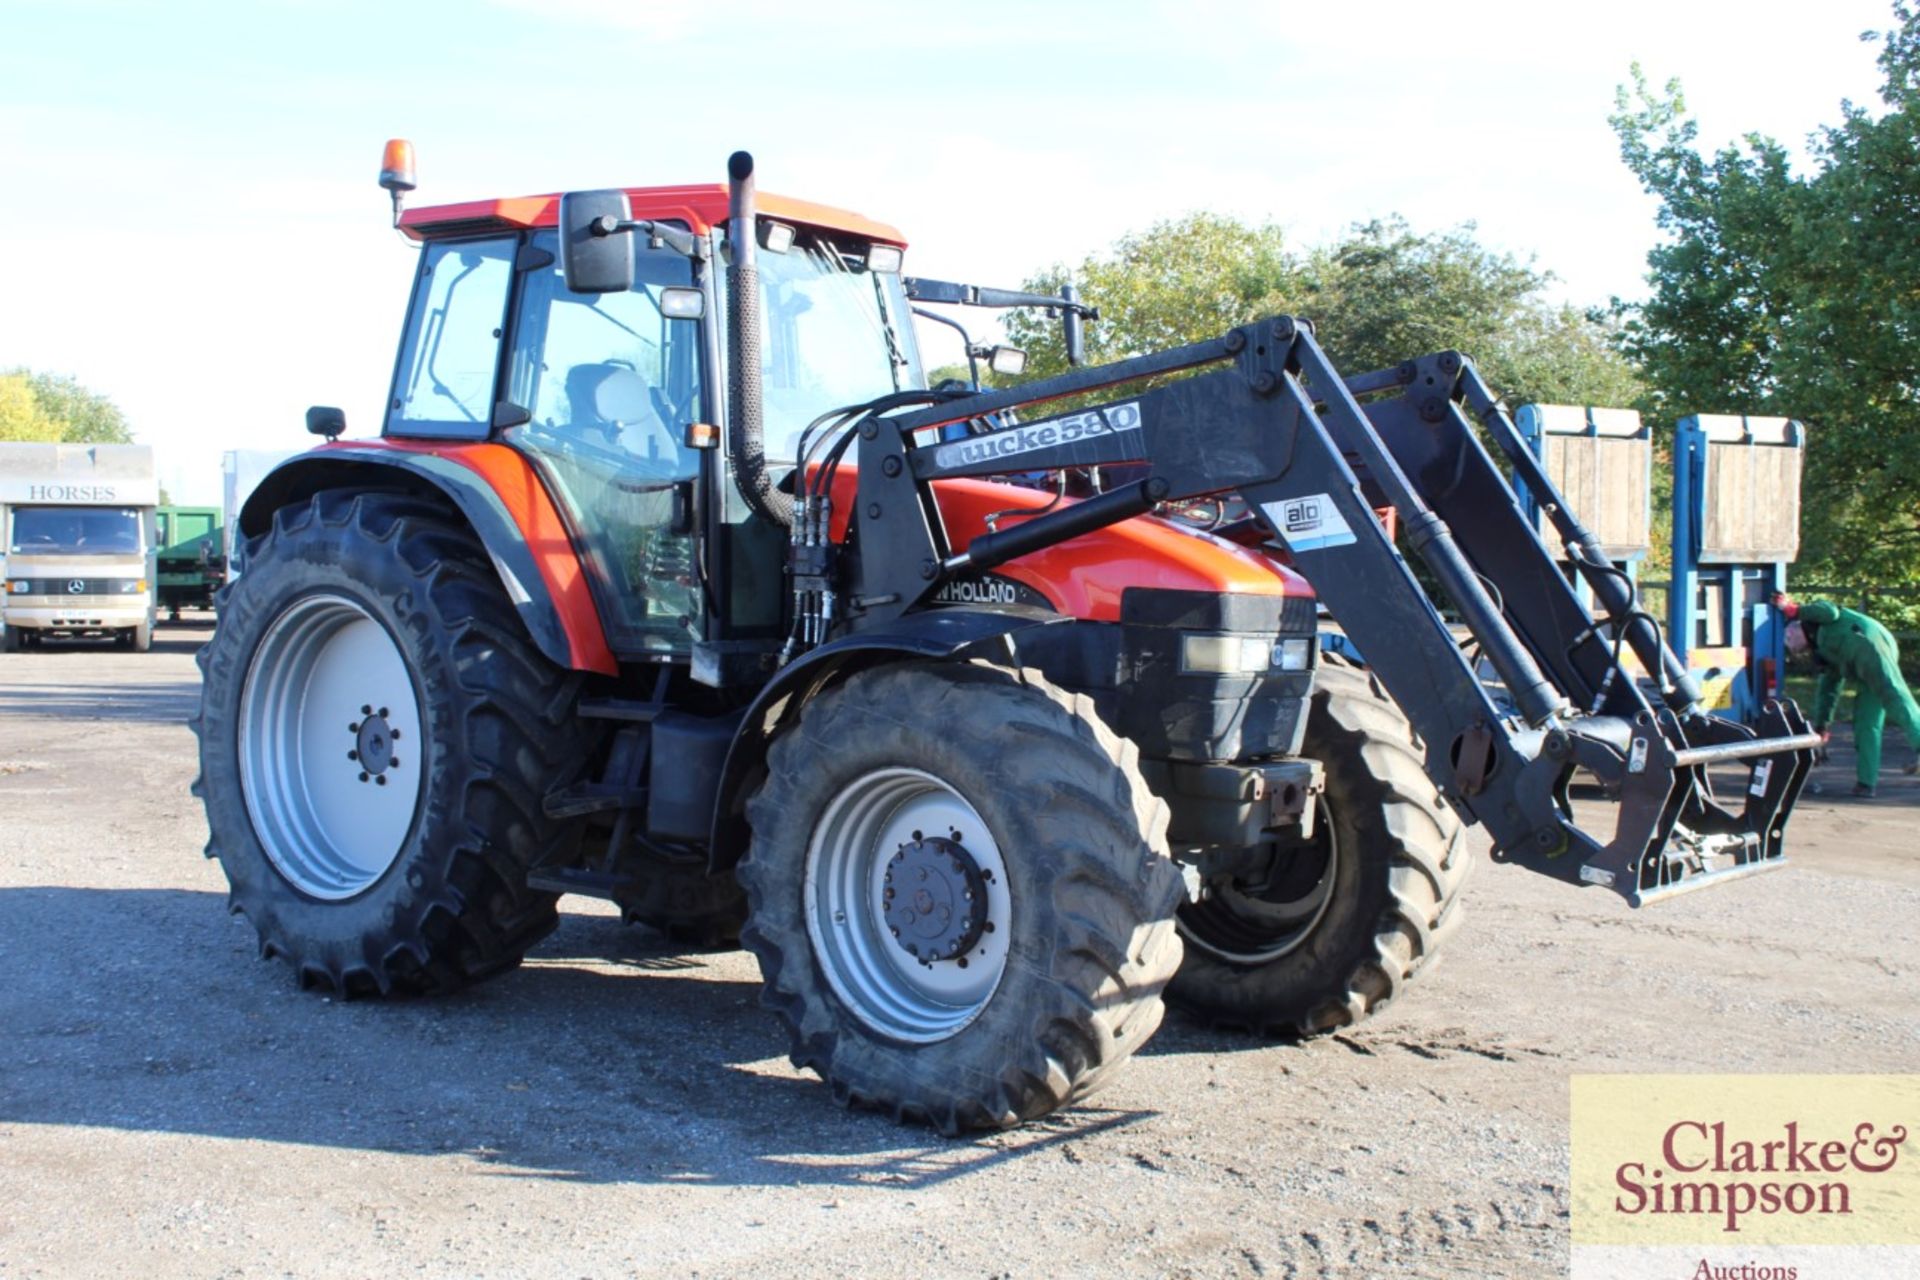 New Holland TM150 4WD tractor. 28/10/2000. 11,839 hours. 520/85R42 rear wheels and tyres @ 60%. - Image 7 of 58